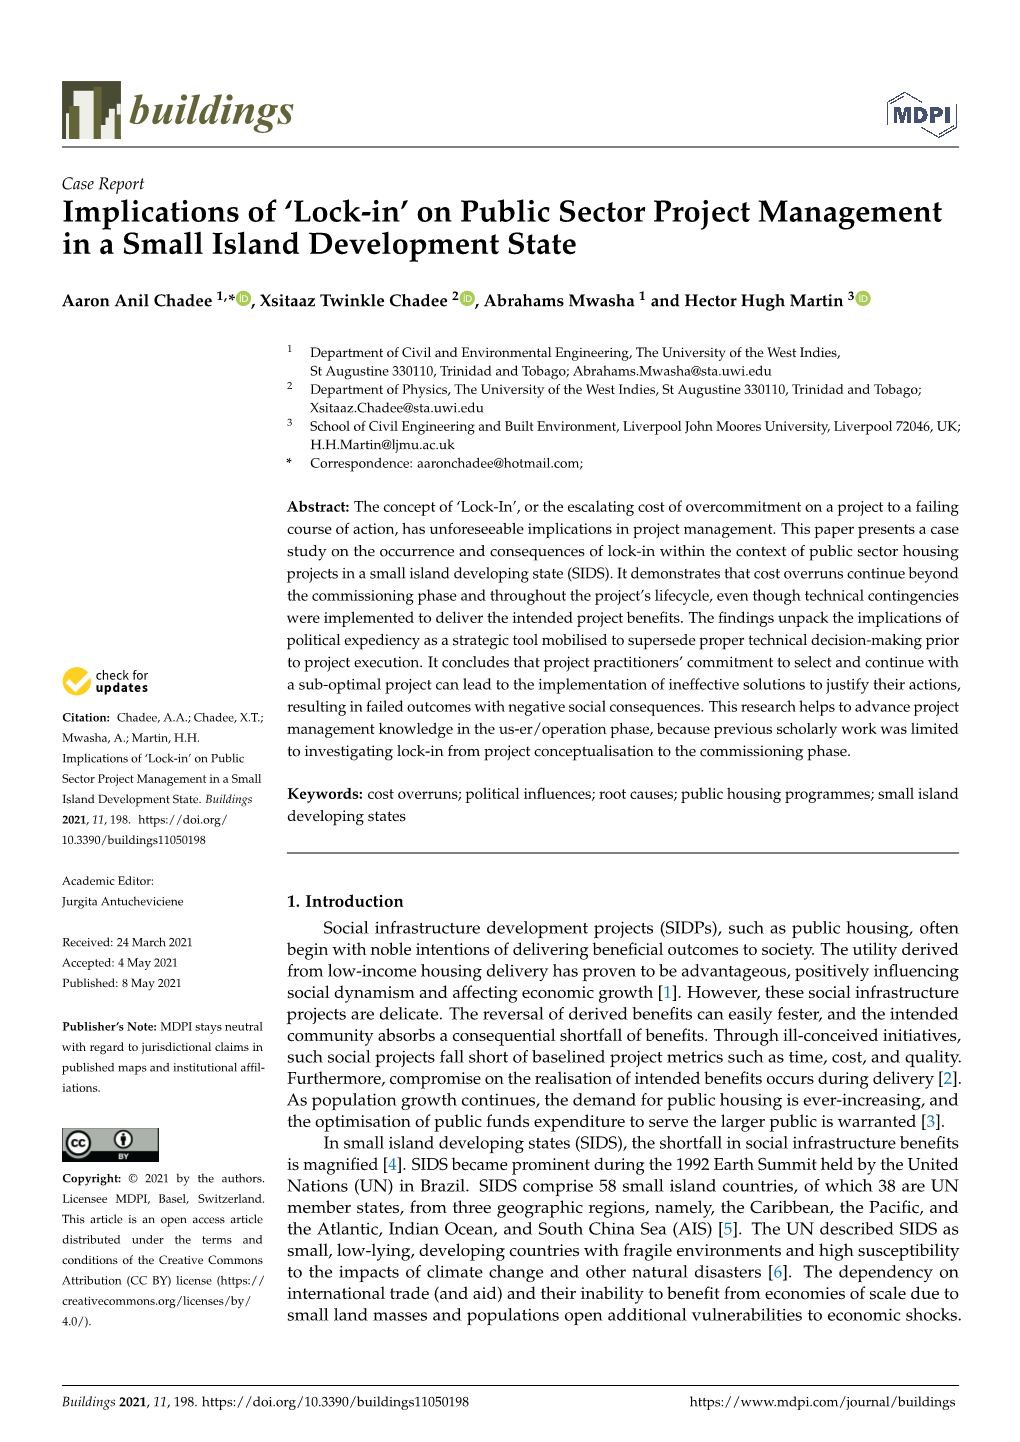 On Public Sector Project Management in a Small Island Development State